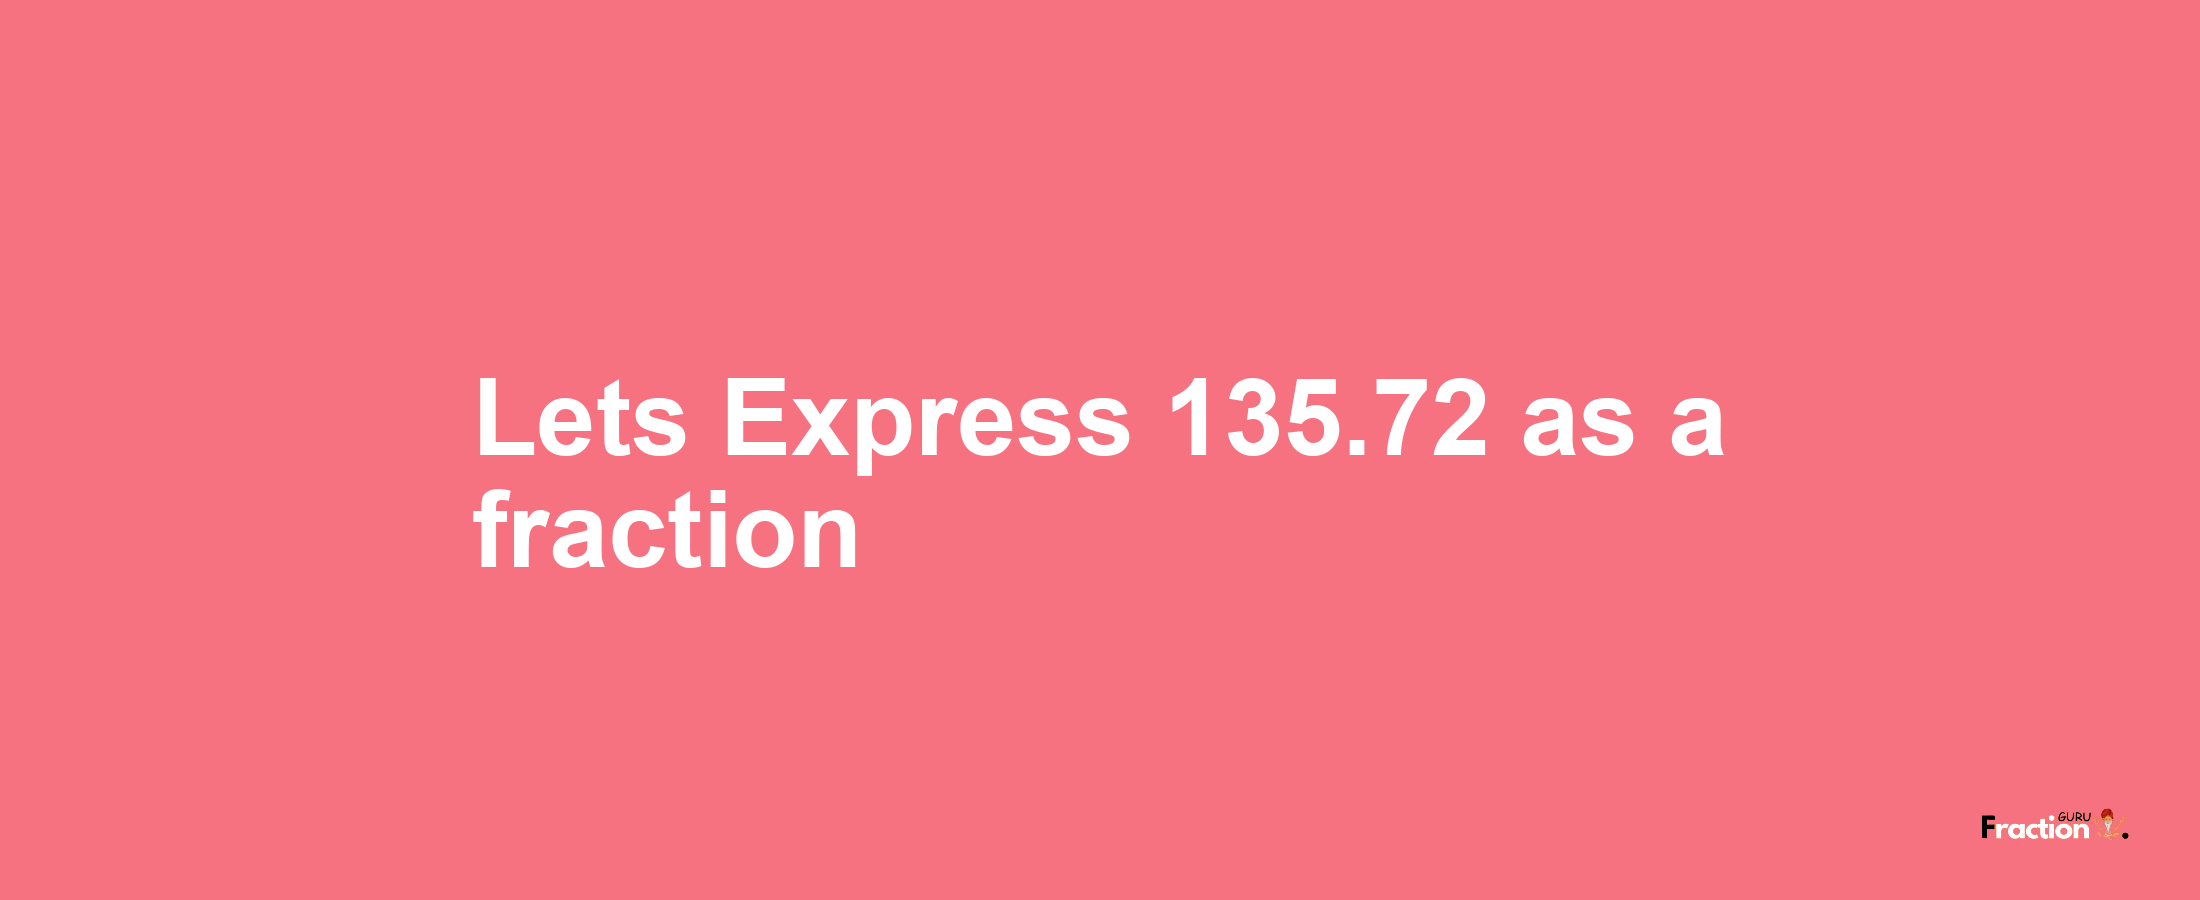 Lets Express 135.72 as afraction